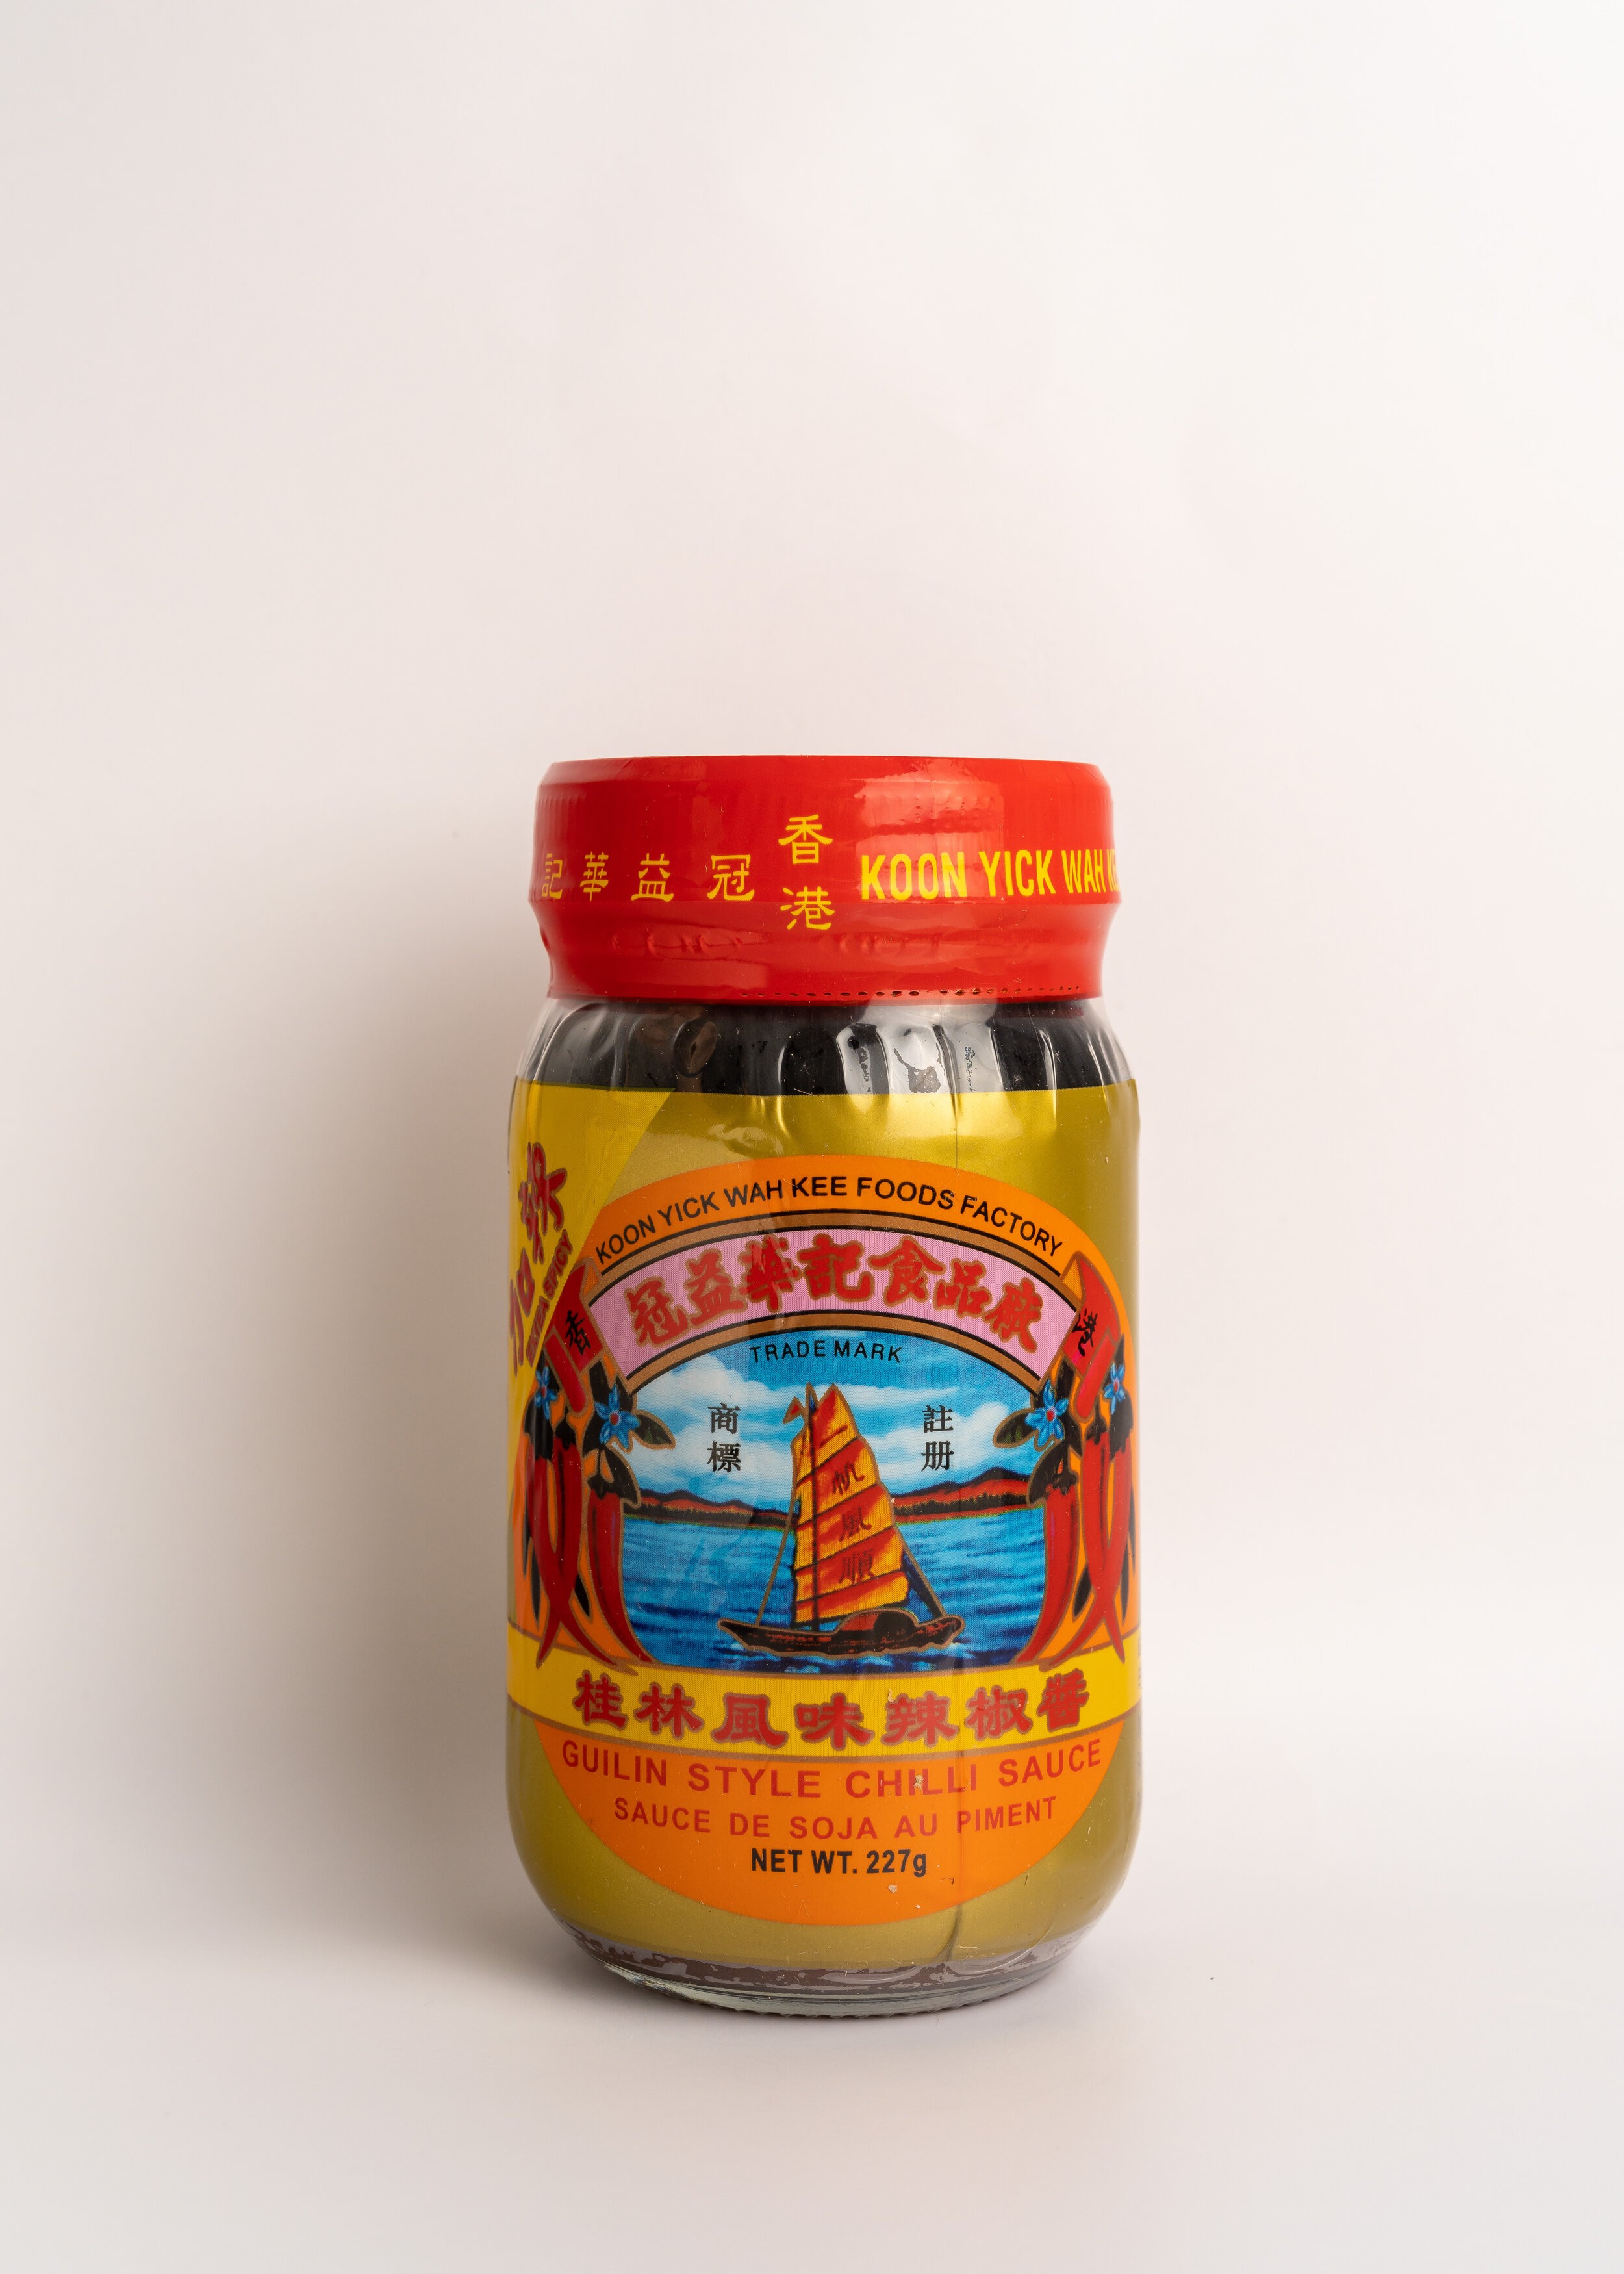 guilin-style-chilli-sauce454g